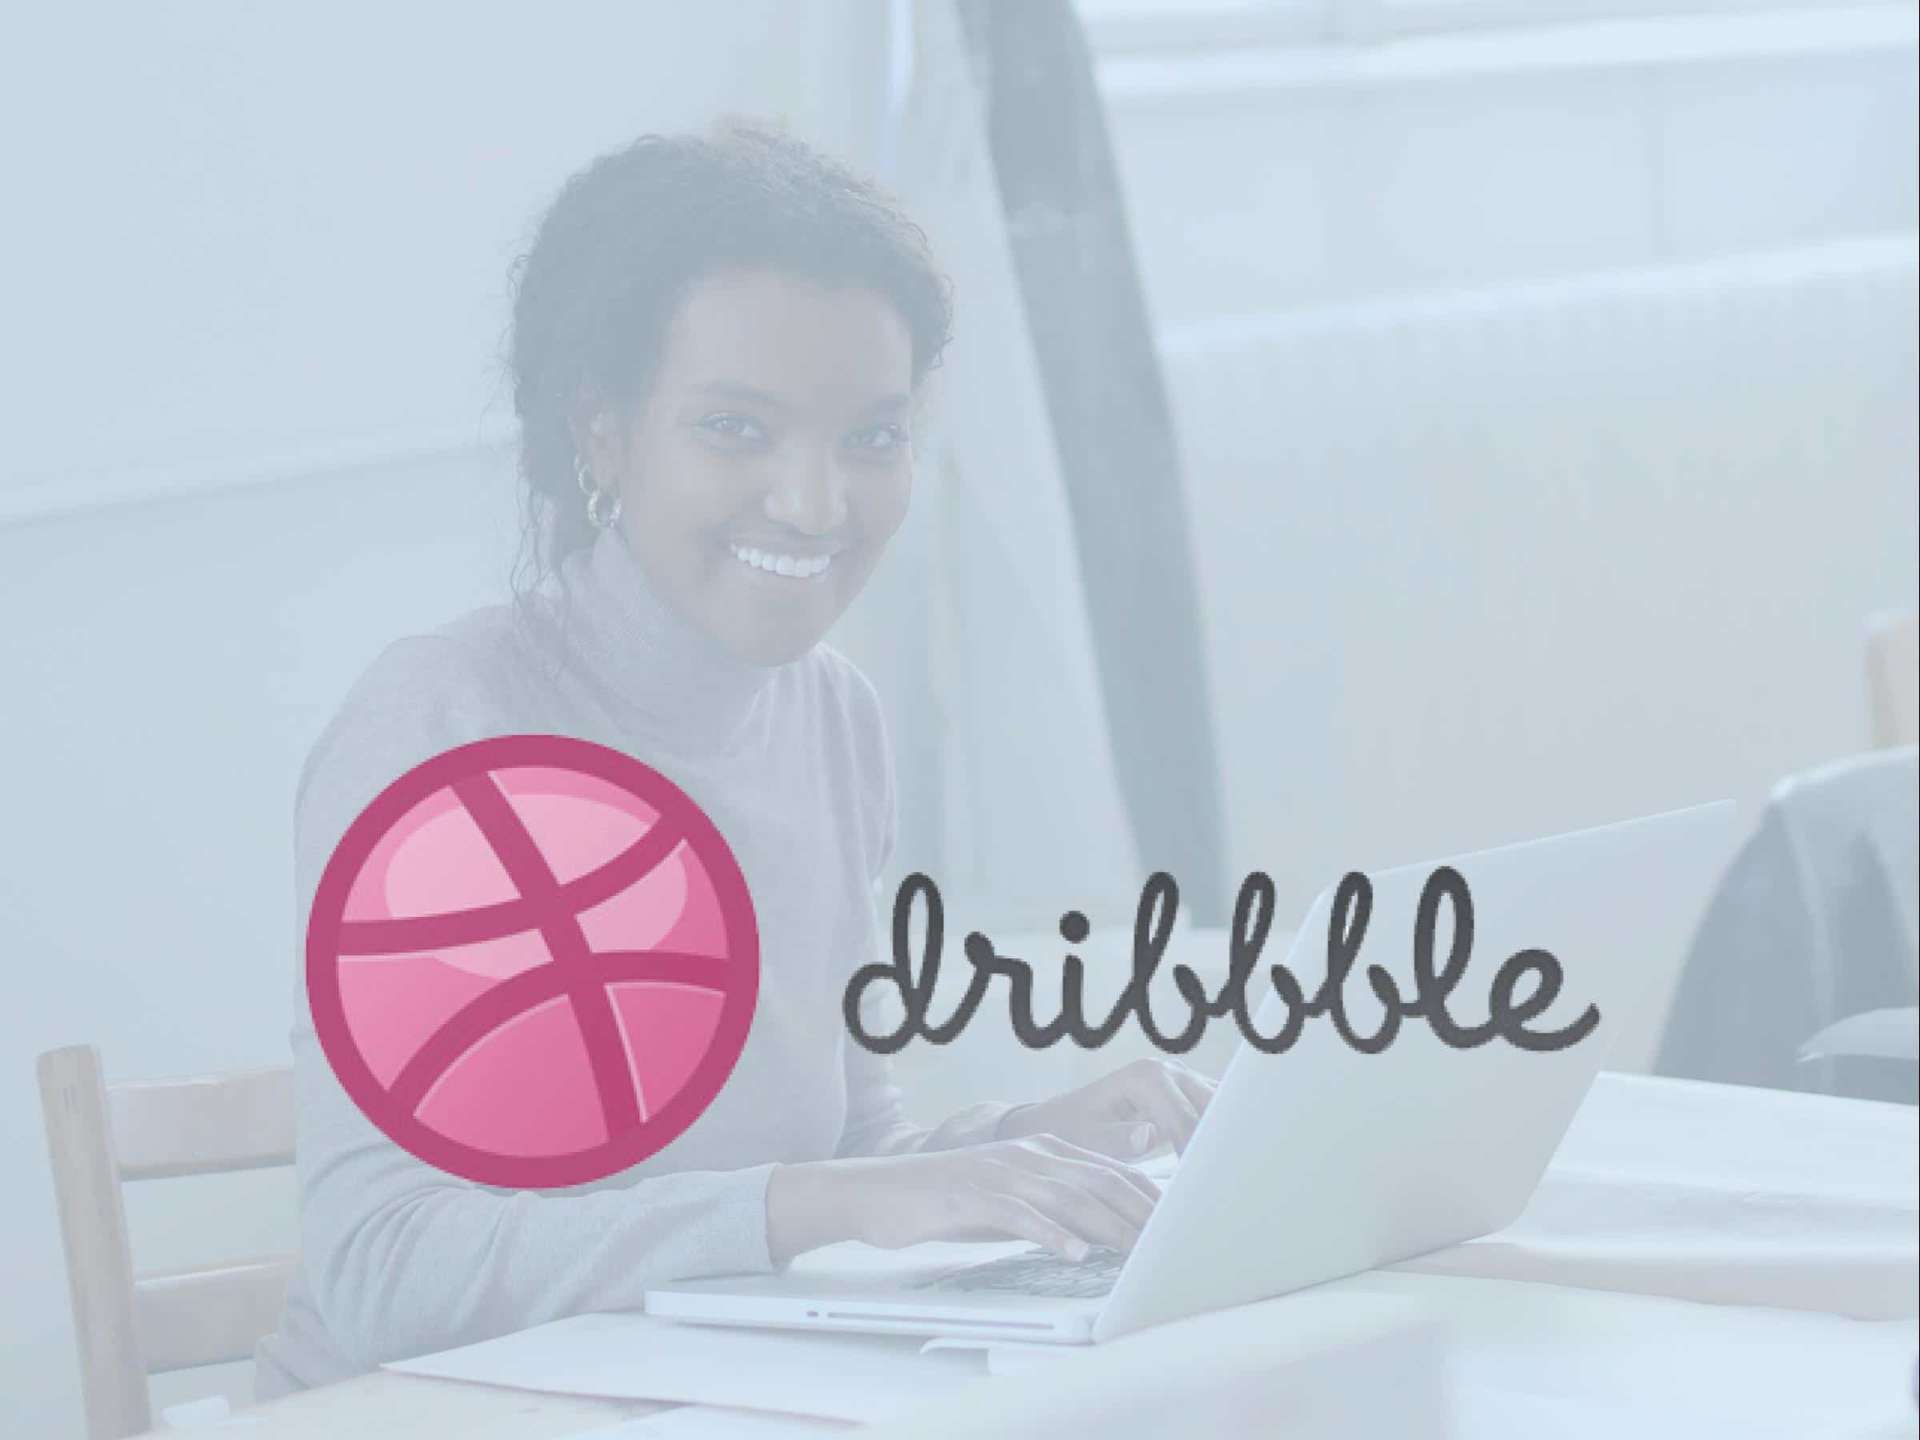 Dribbble - See How To Find Remote Jobs